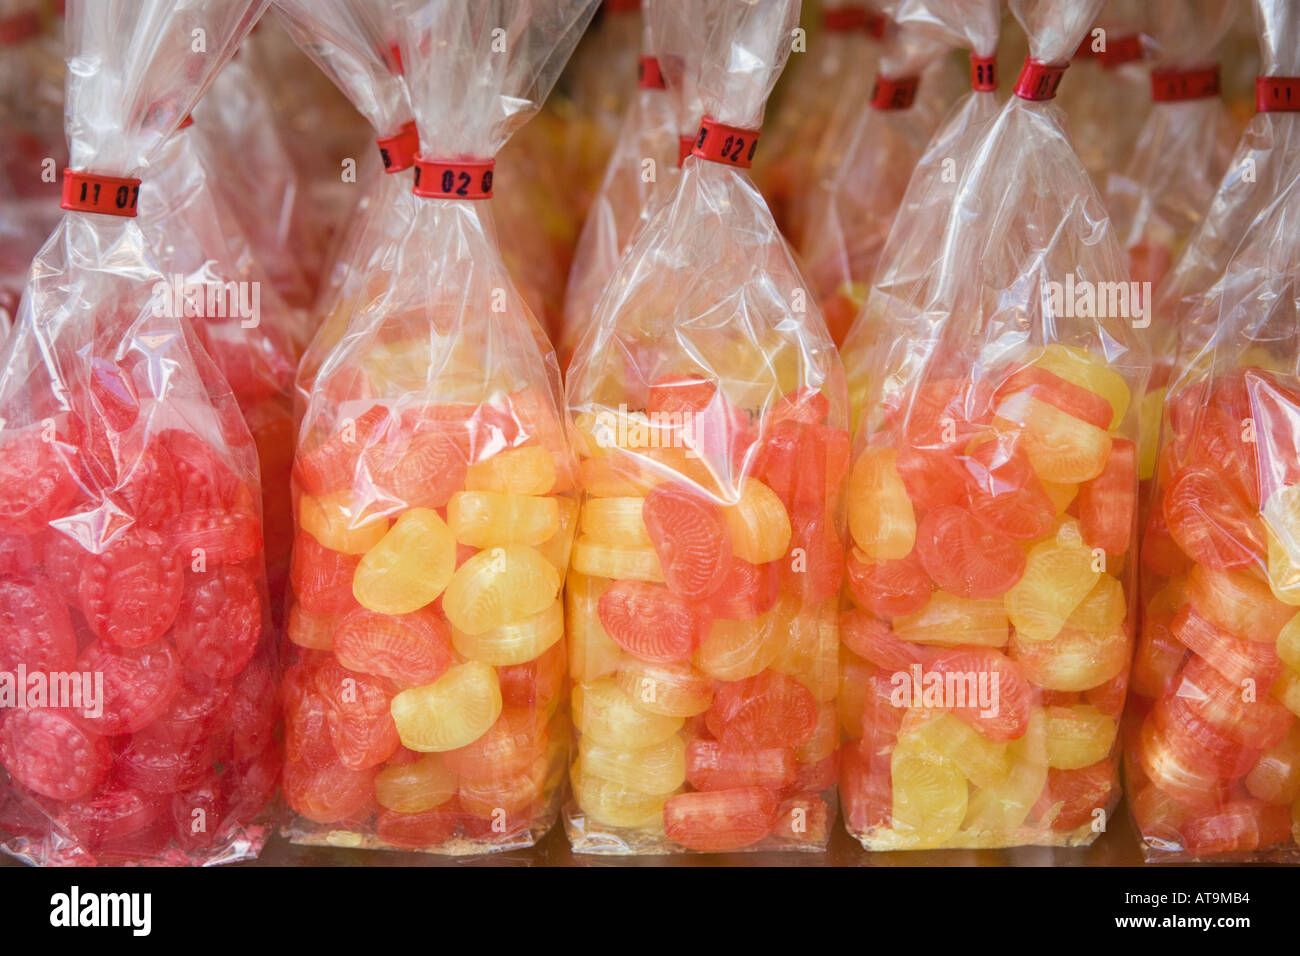 Cellophane bags of sweets Stock Photo - Alamy